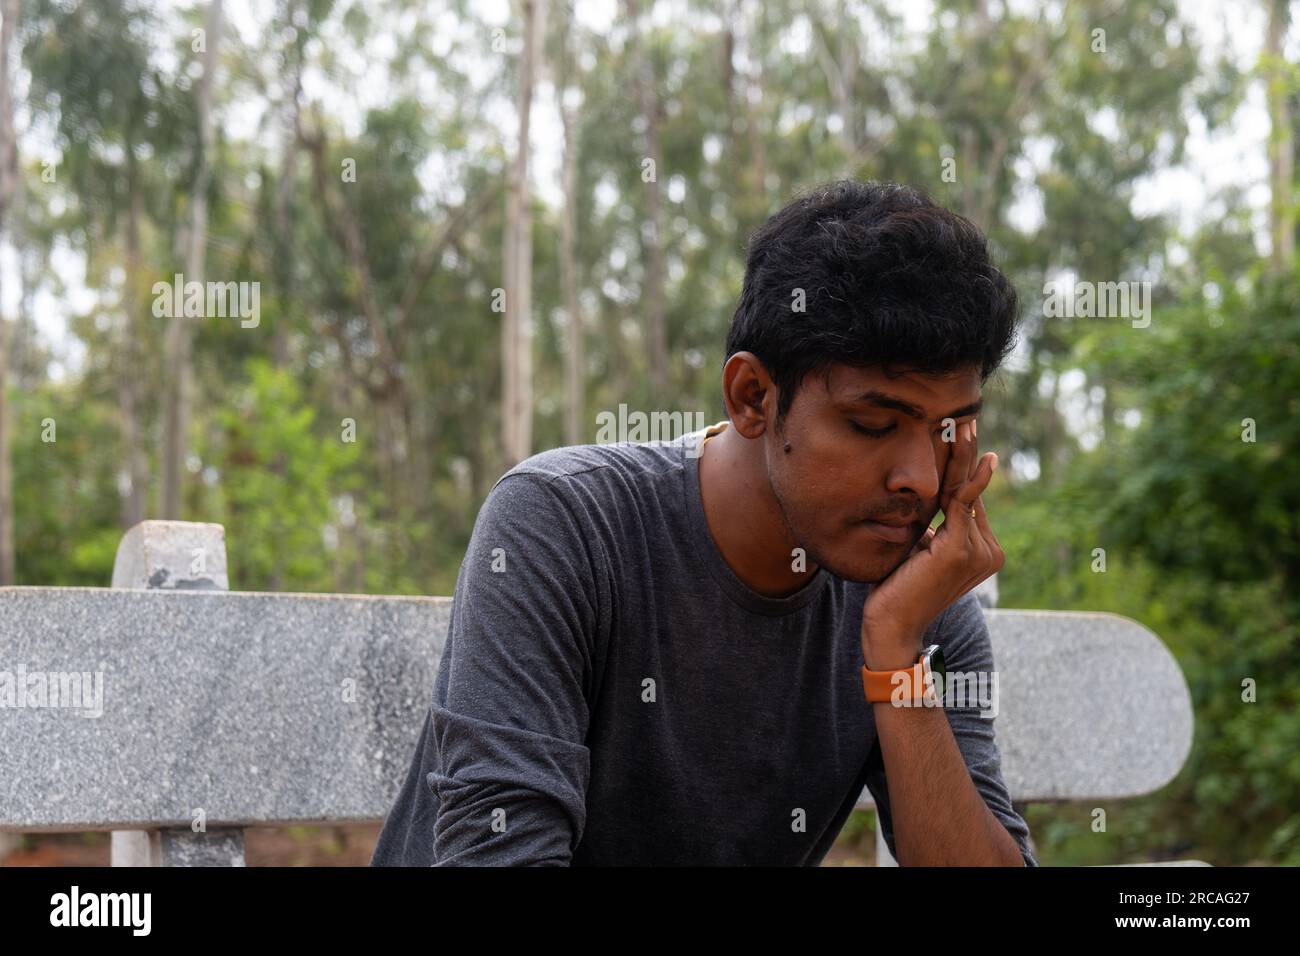 A depressed Indian man sits on a bench in a park, tears streaming down his face. He looks lost and alone, his head in his hands. Stock Photo